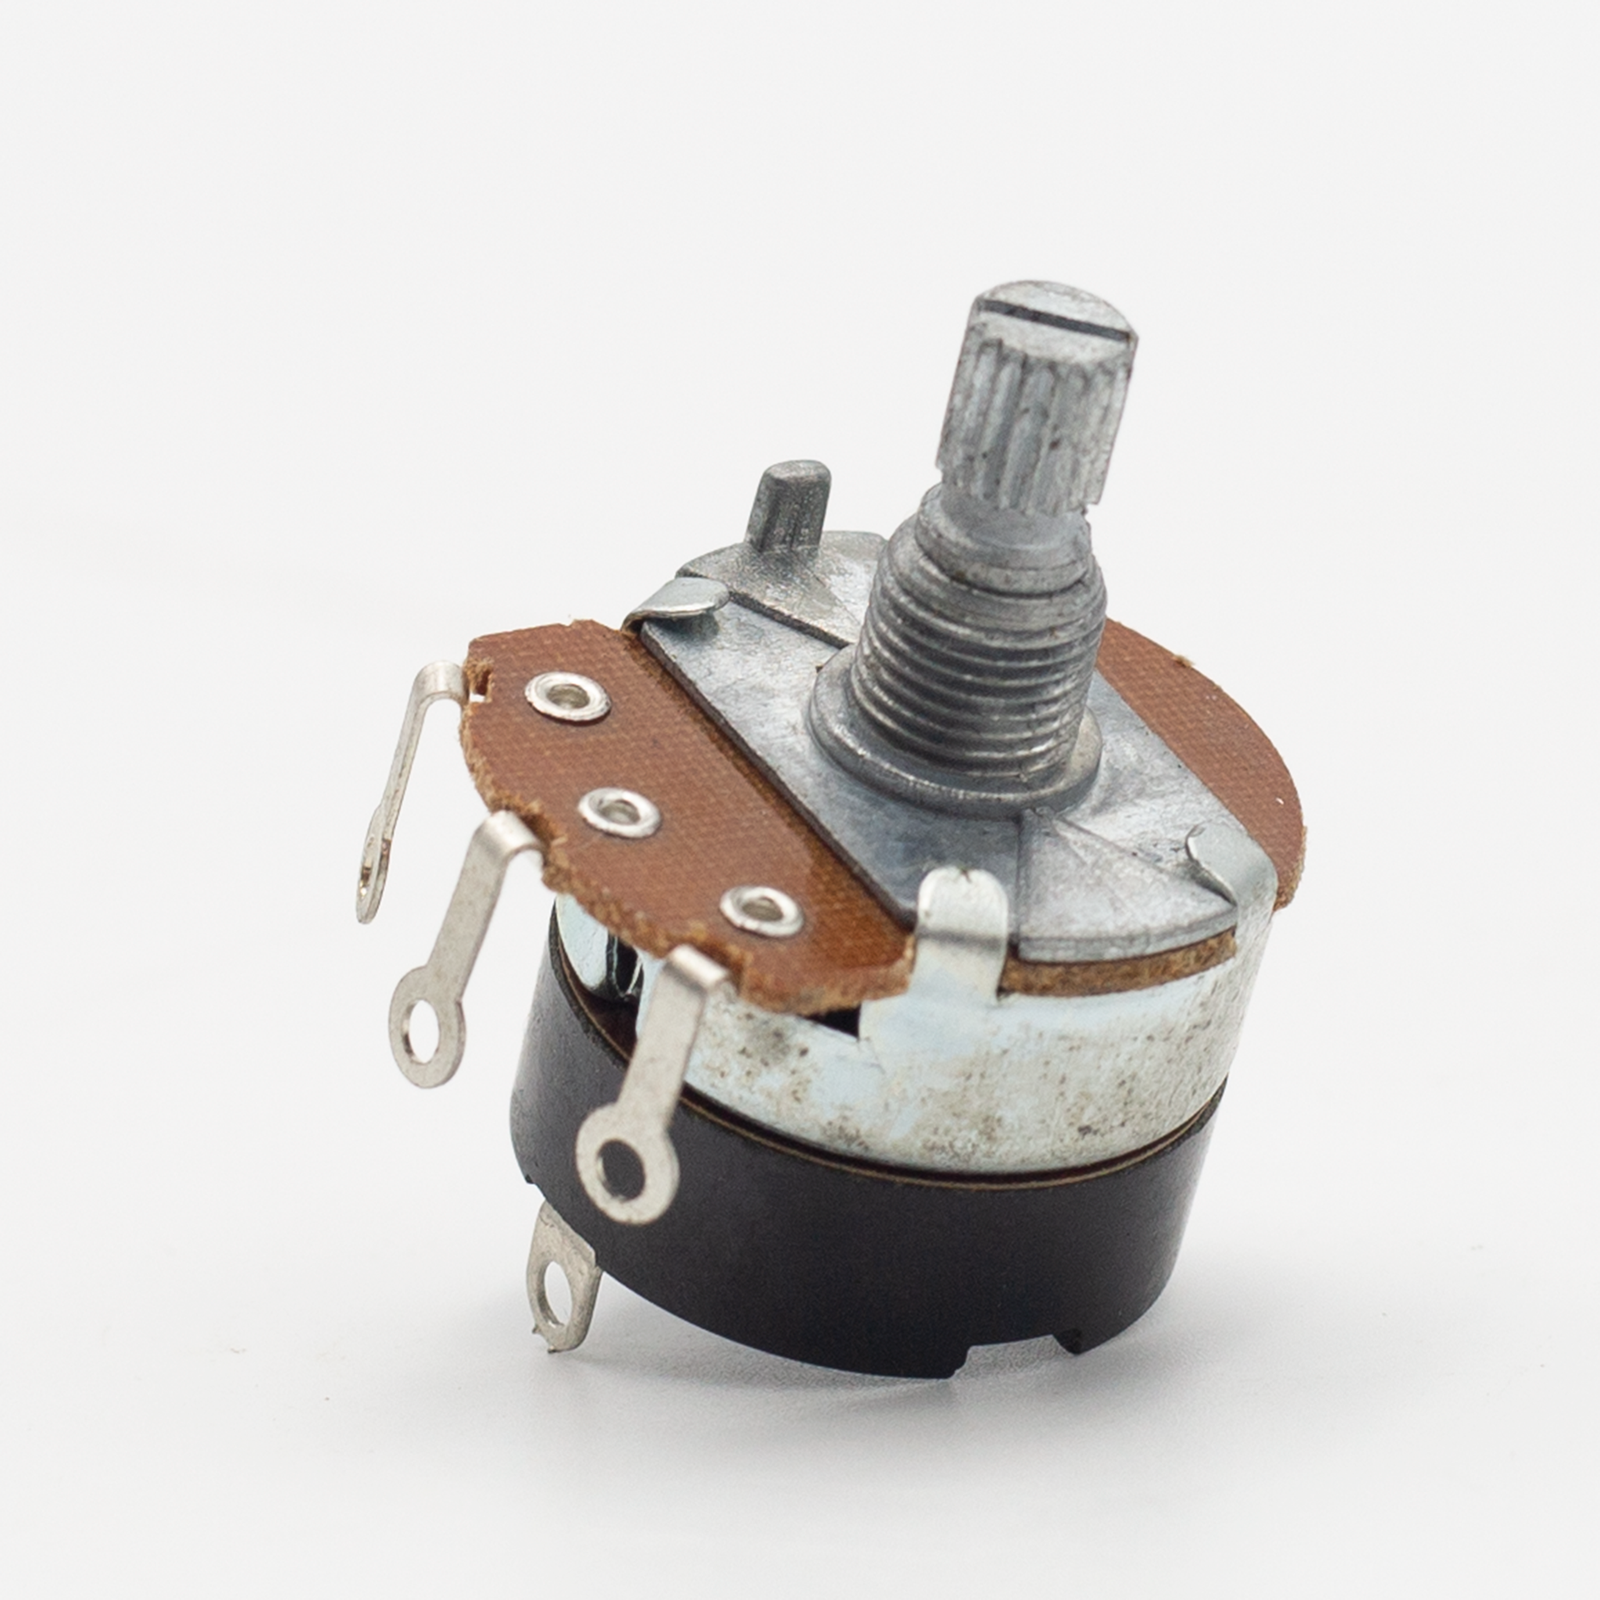 500K Potentiometer for JORES TECHNOLOGIES Continuous band sealers